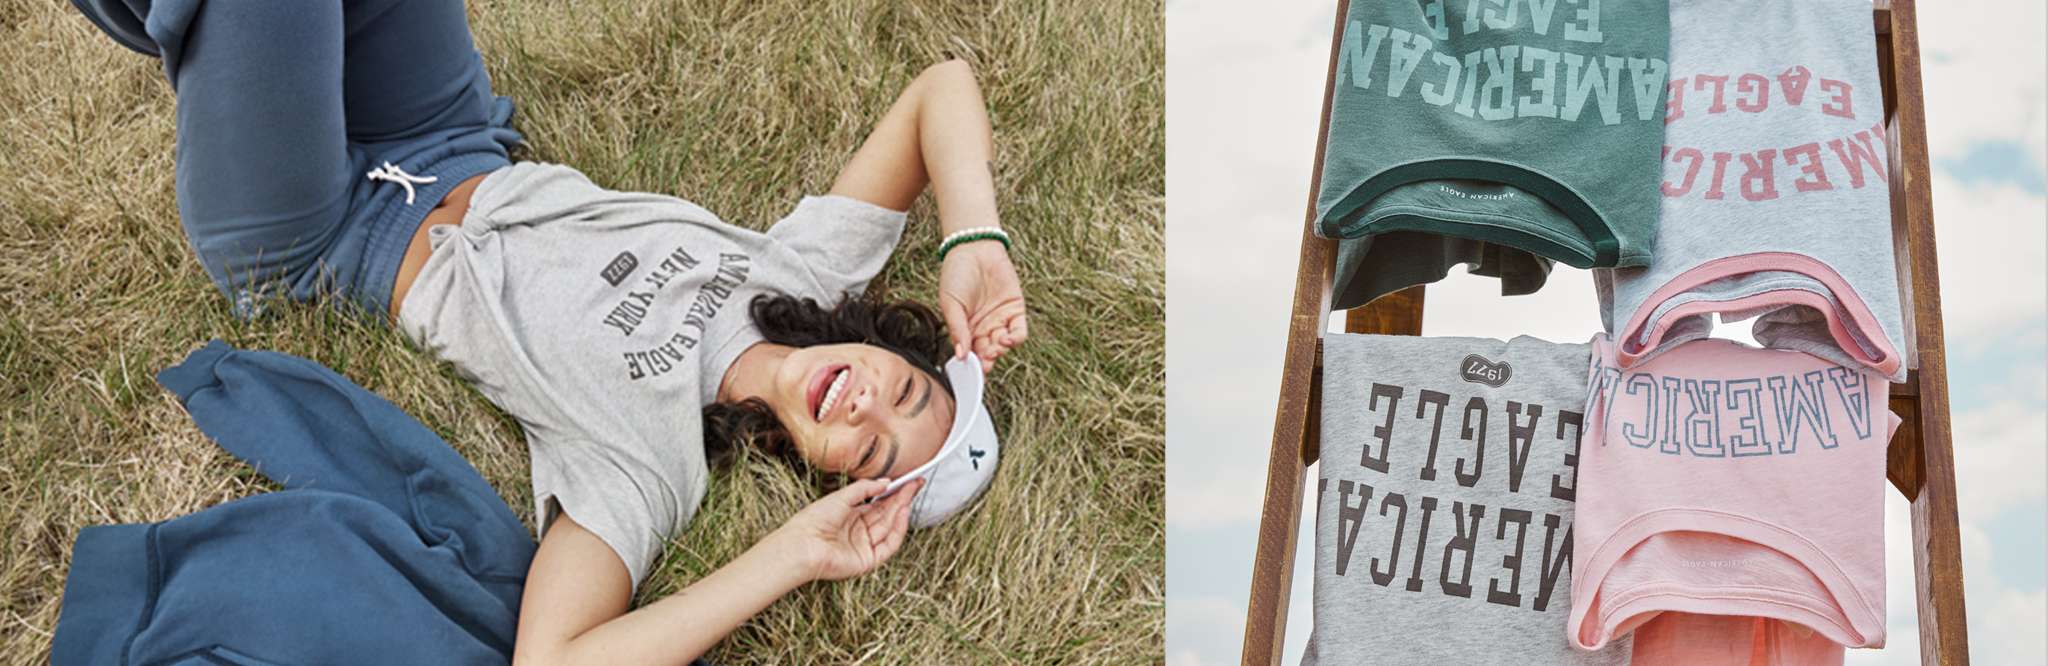 woman posing in grass wearing AE graphic tee